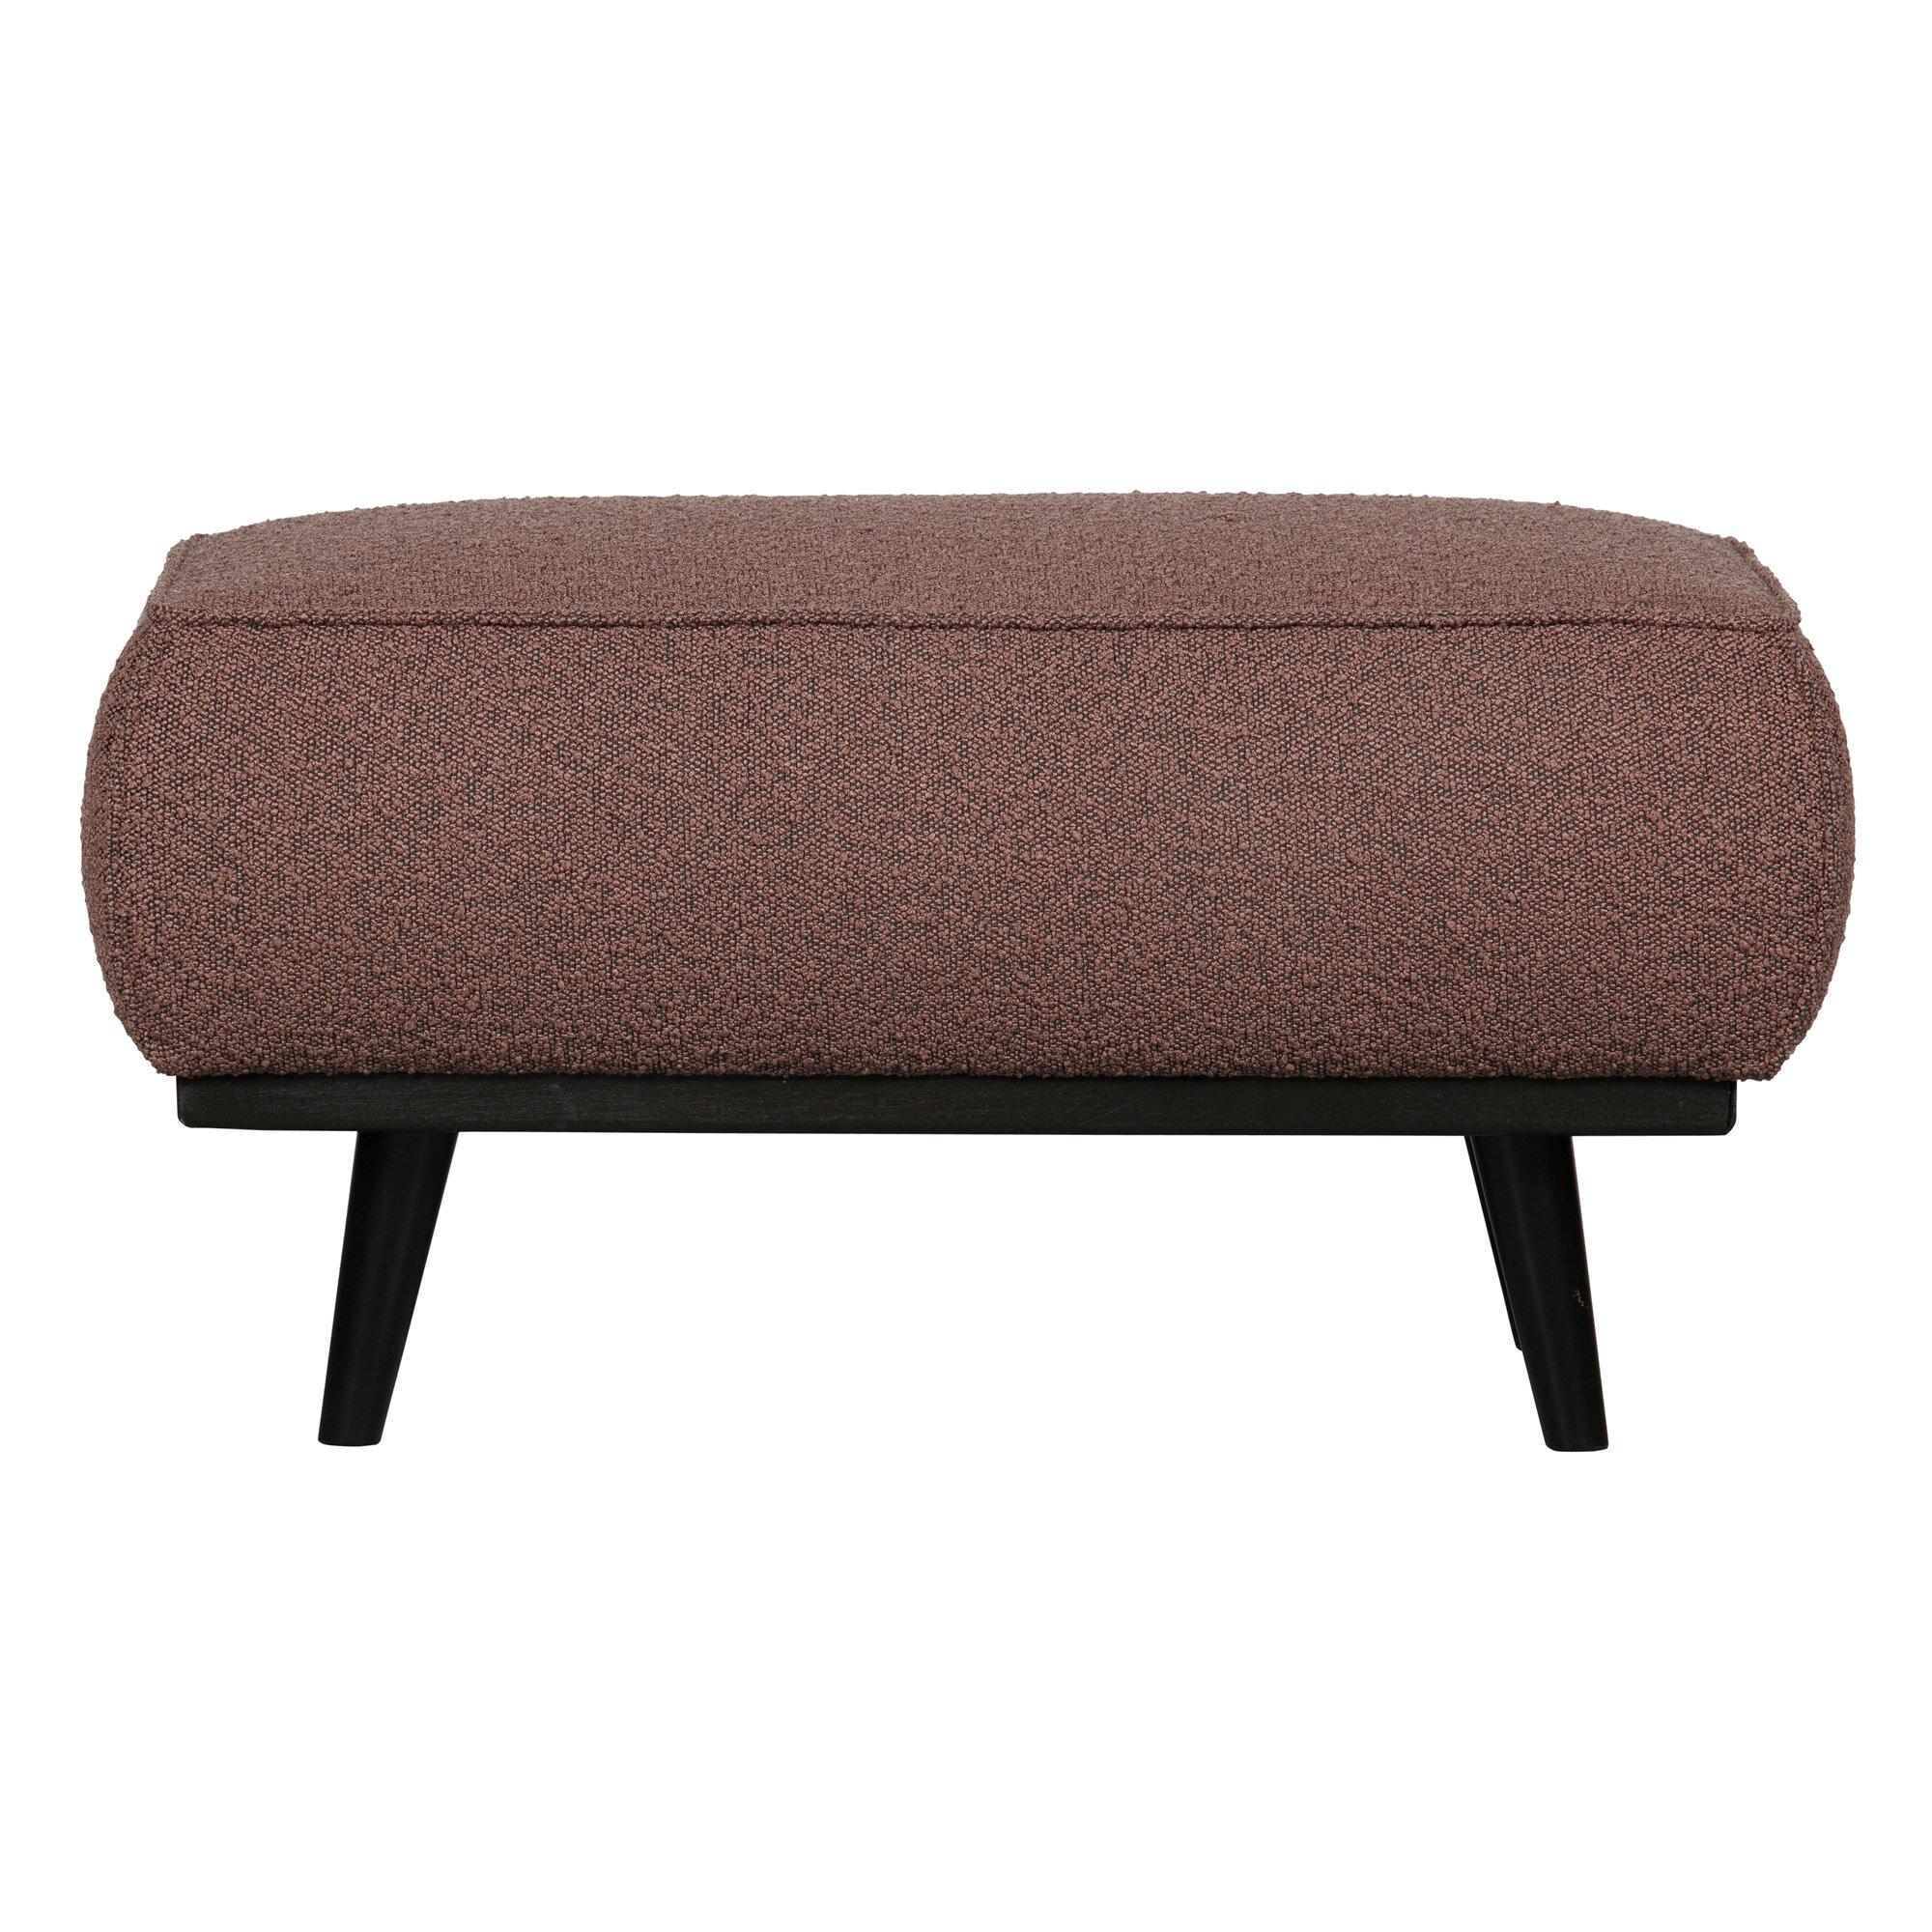  Statement Puf Boucle - Coffee fra BePureHome i Boucle (Varenr: 378663-K)